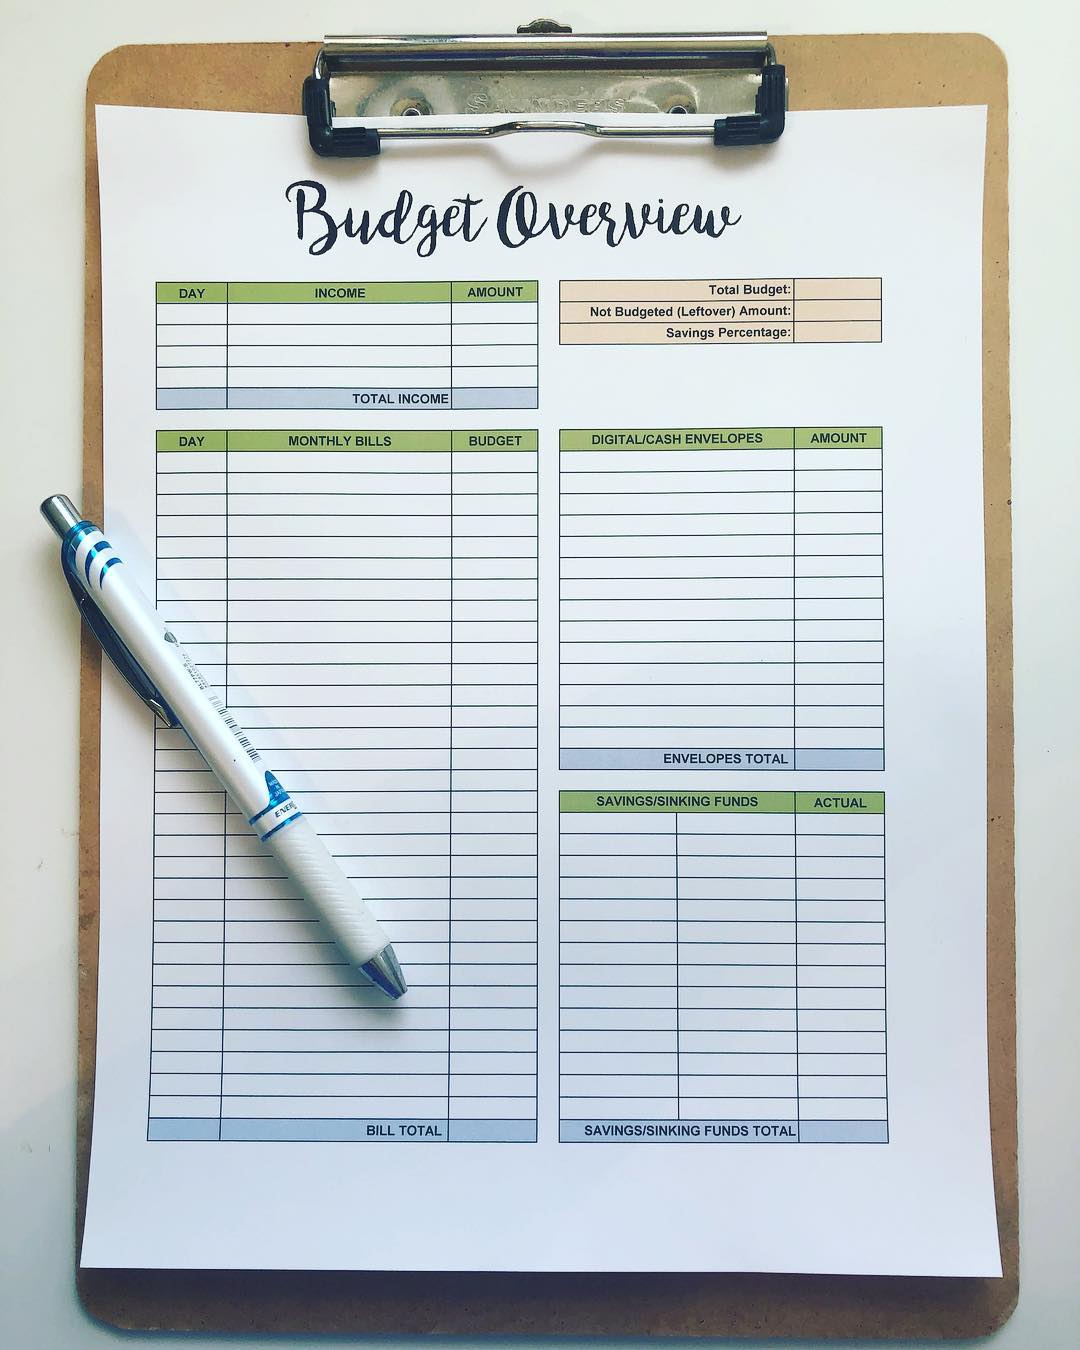 Budget sheet on clipboard. Photo by Instagram user @thebudgetlife_